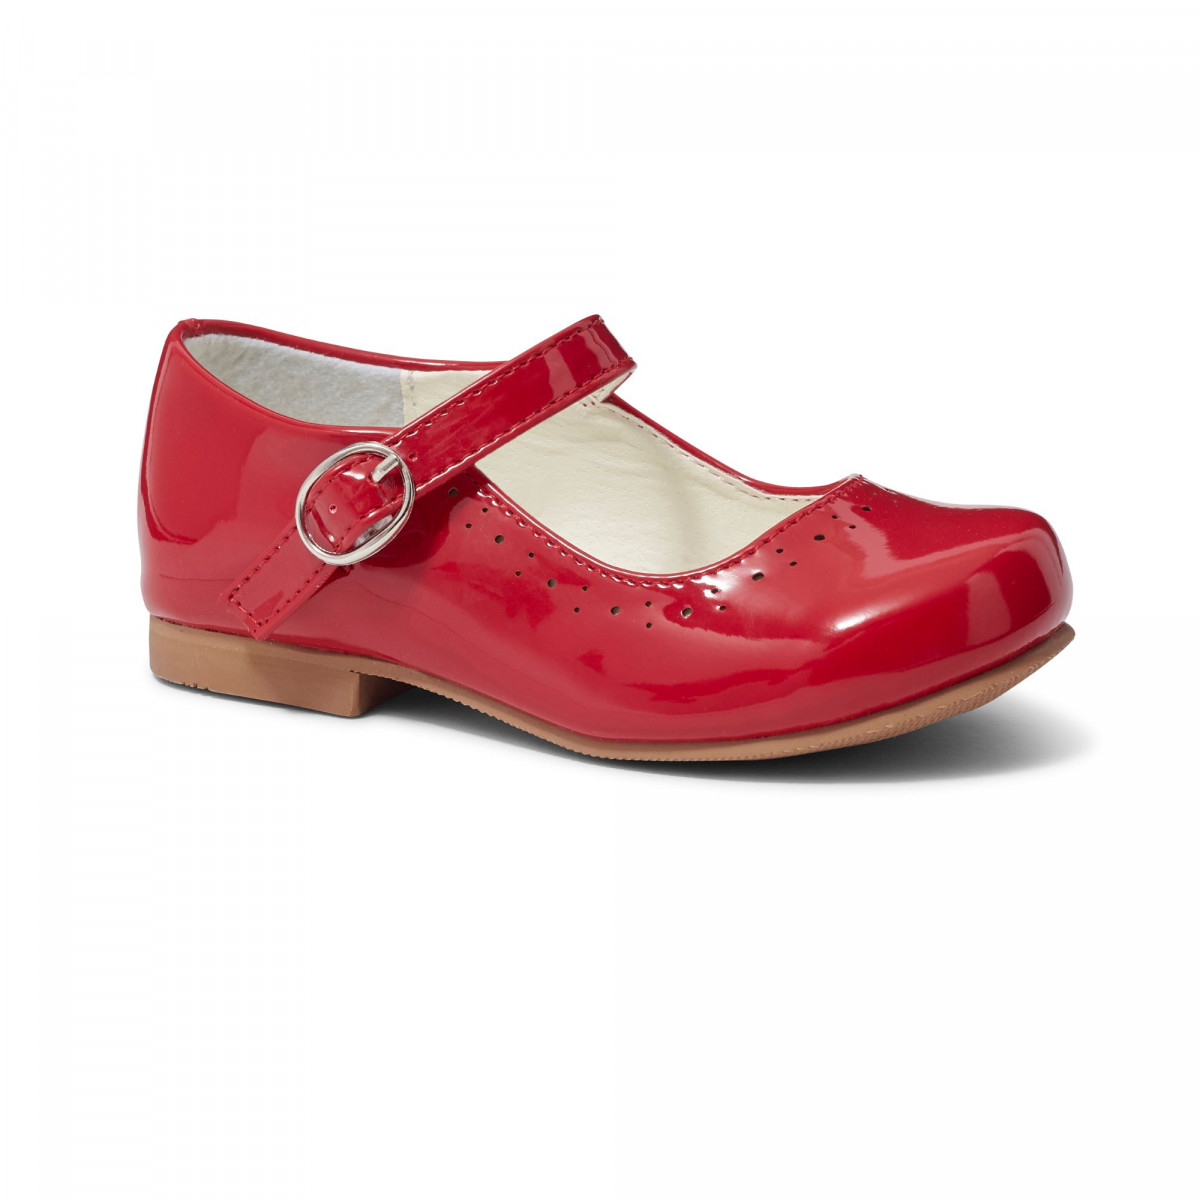 baby girl mary jane shoes